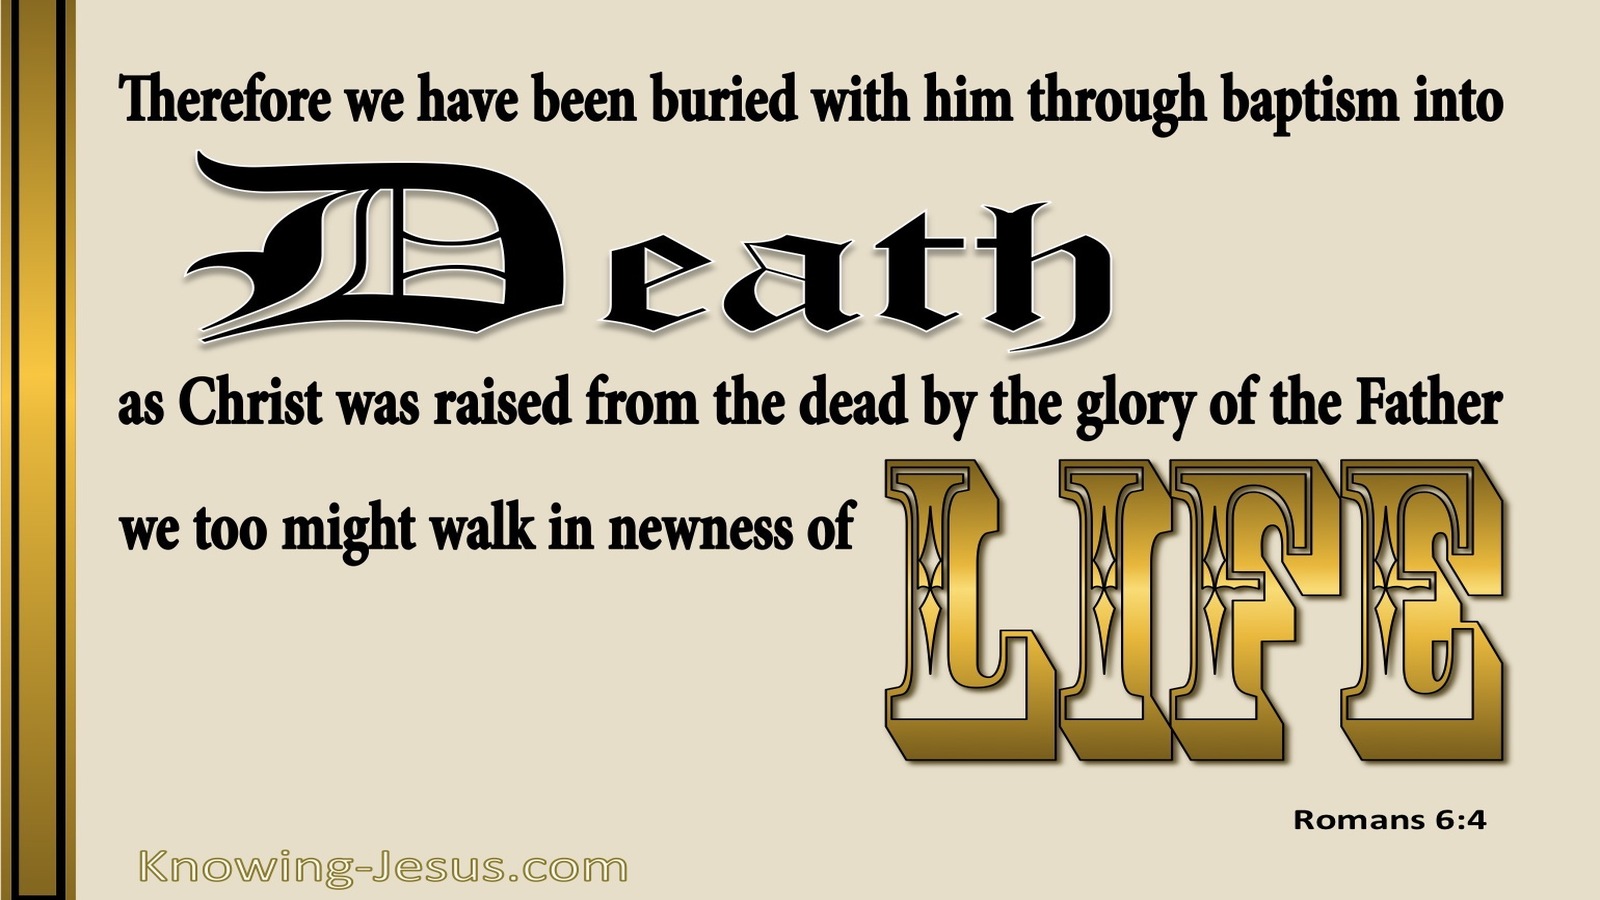 Romans 6:4 Buried Into His Death Raised To Newness Of Life (gold)